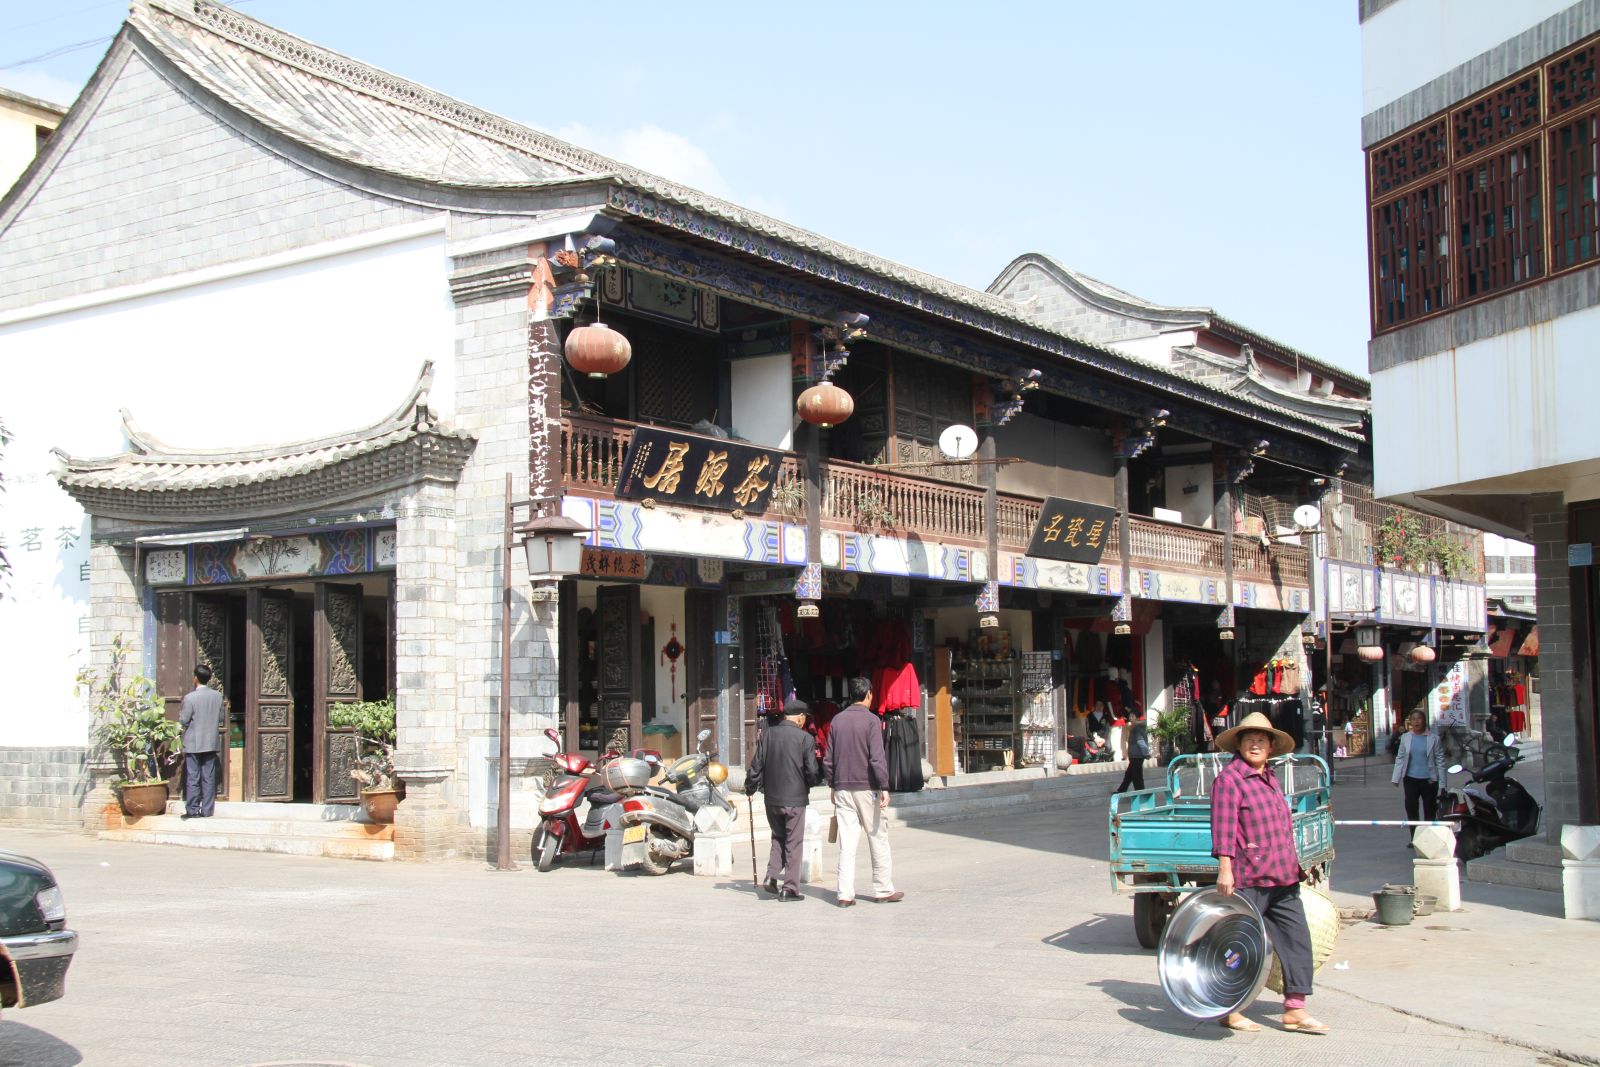 China is expected to become a high-income country soon: shops in Jianshui in Yunnan Province.